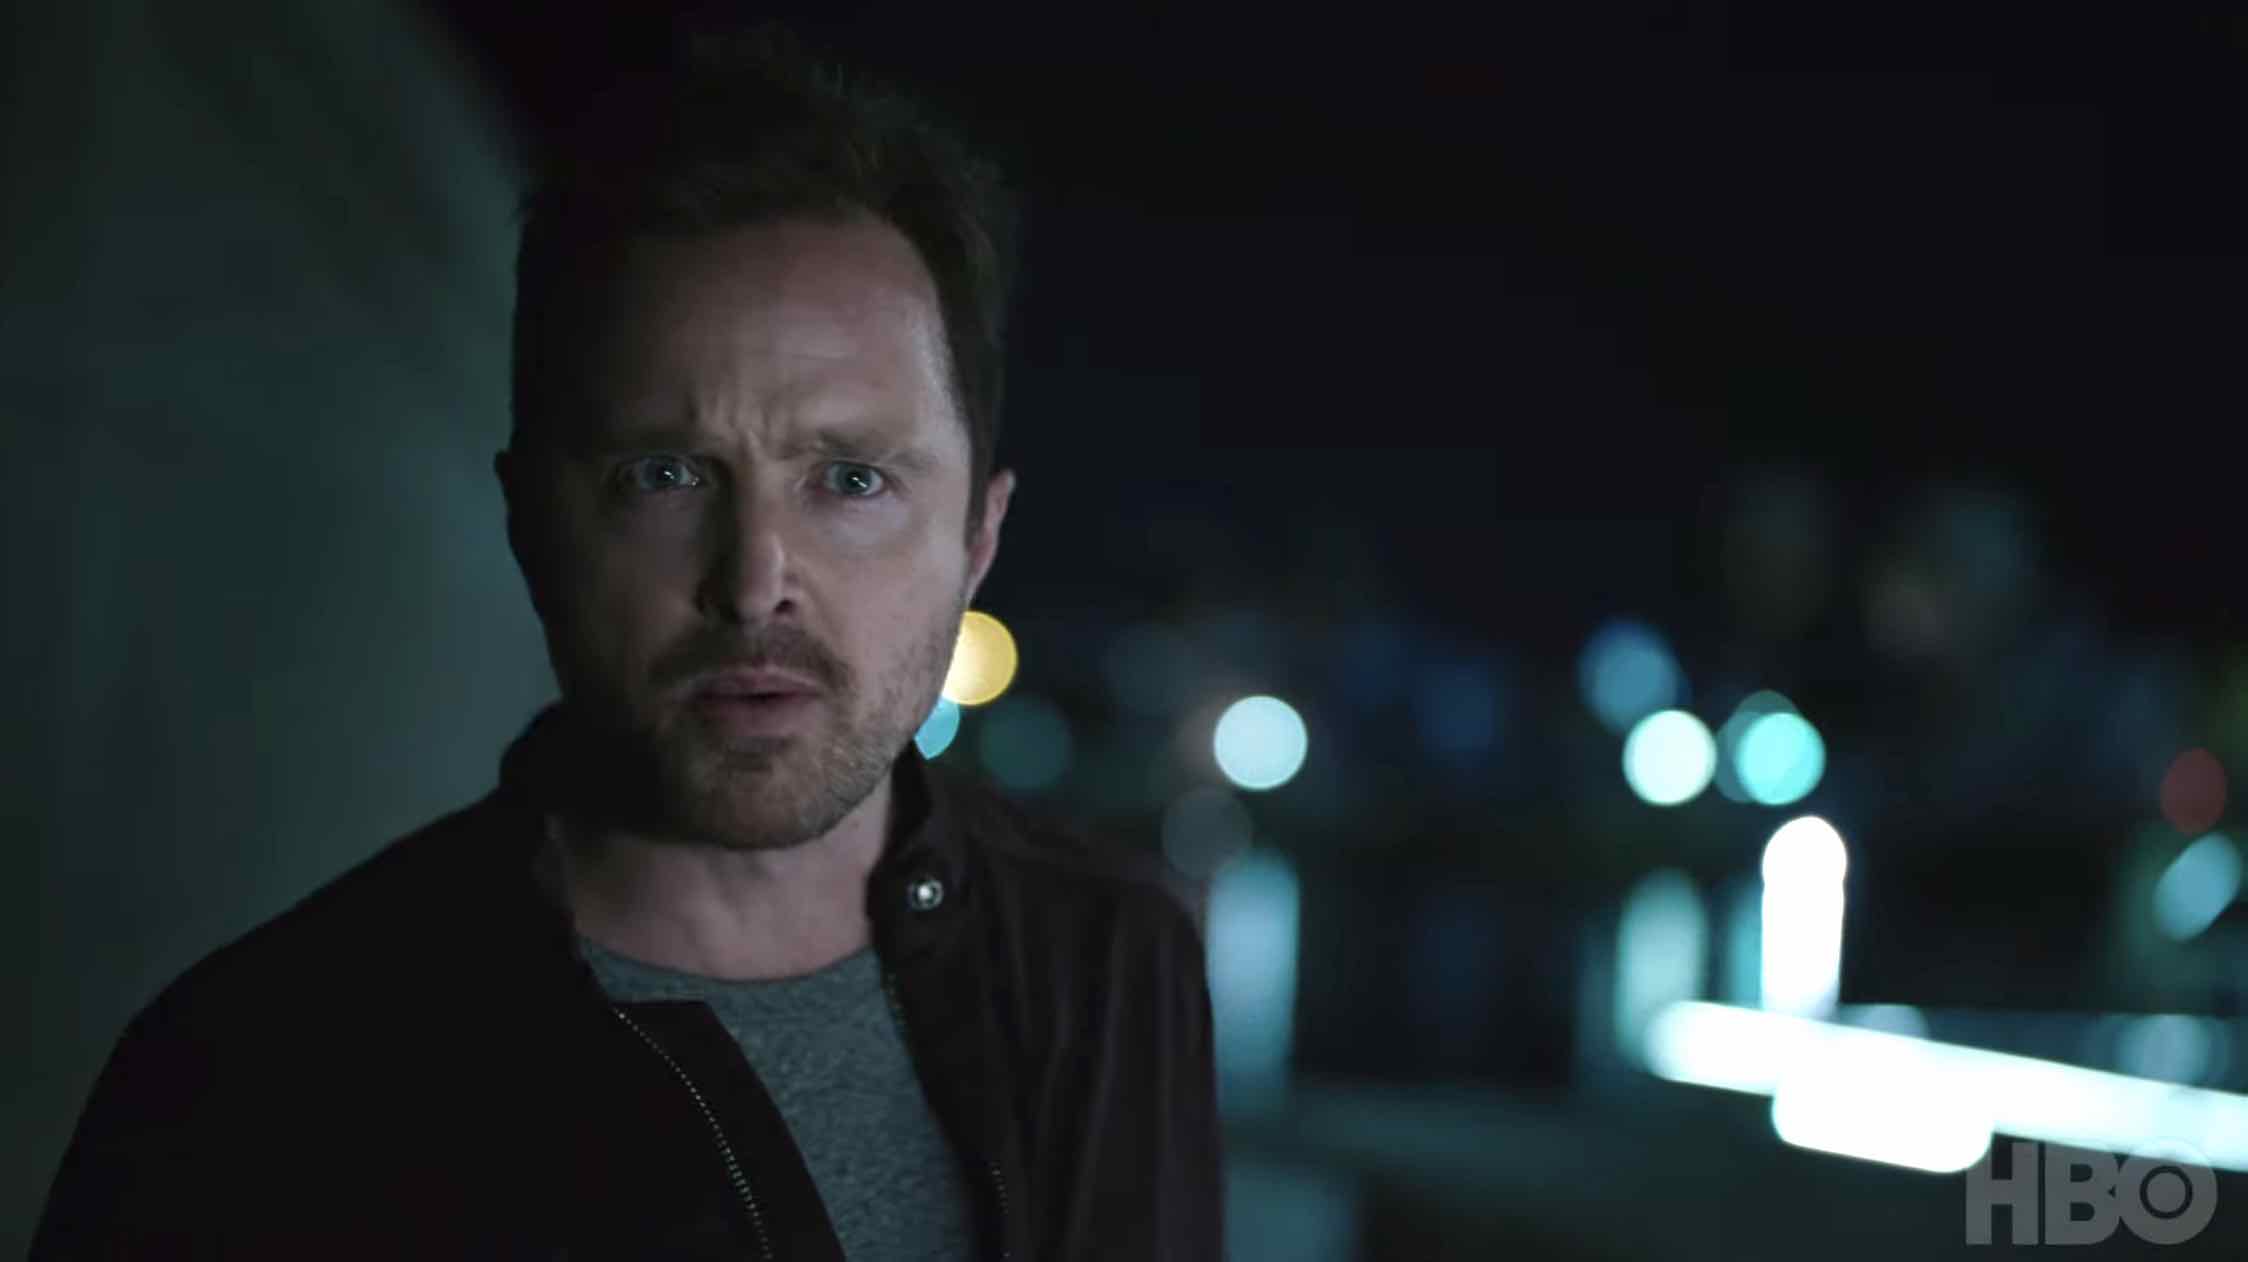 In the first trailer for 'Westworld' S3, new cast member Aaron Paul is front and center, with most of the other faces missing except Evan Rachel Wood.